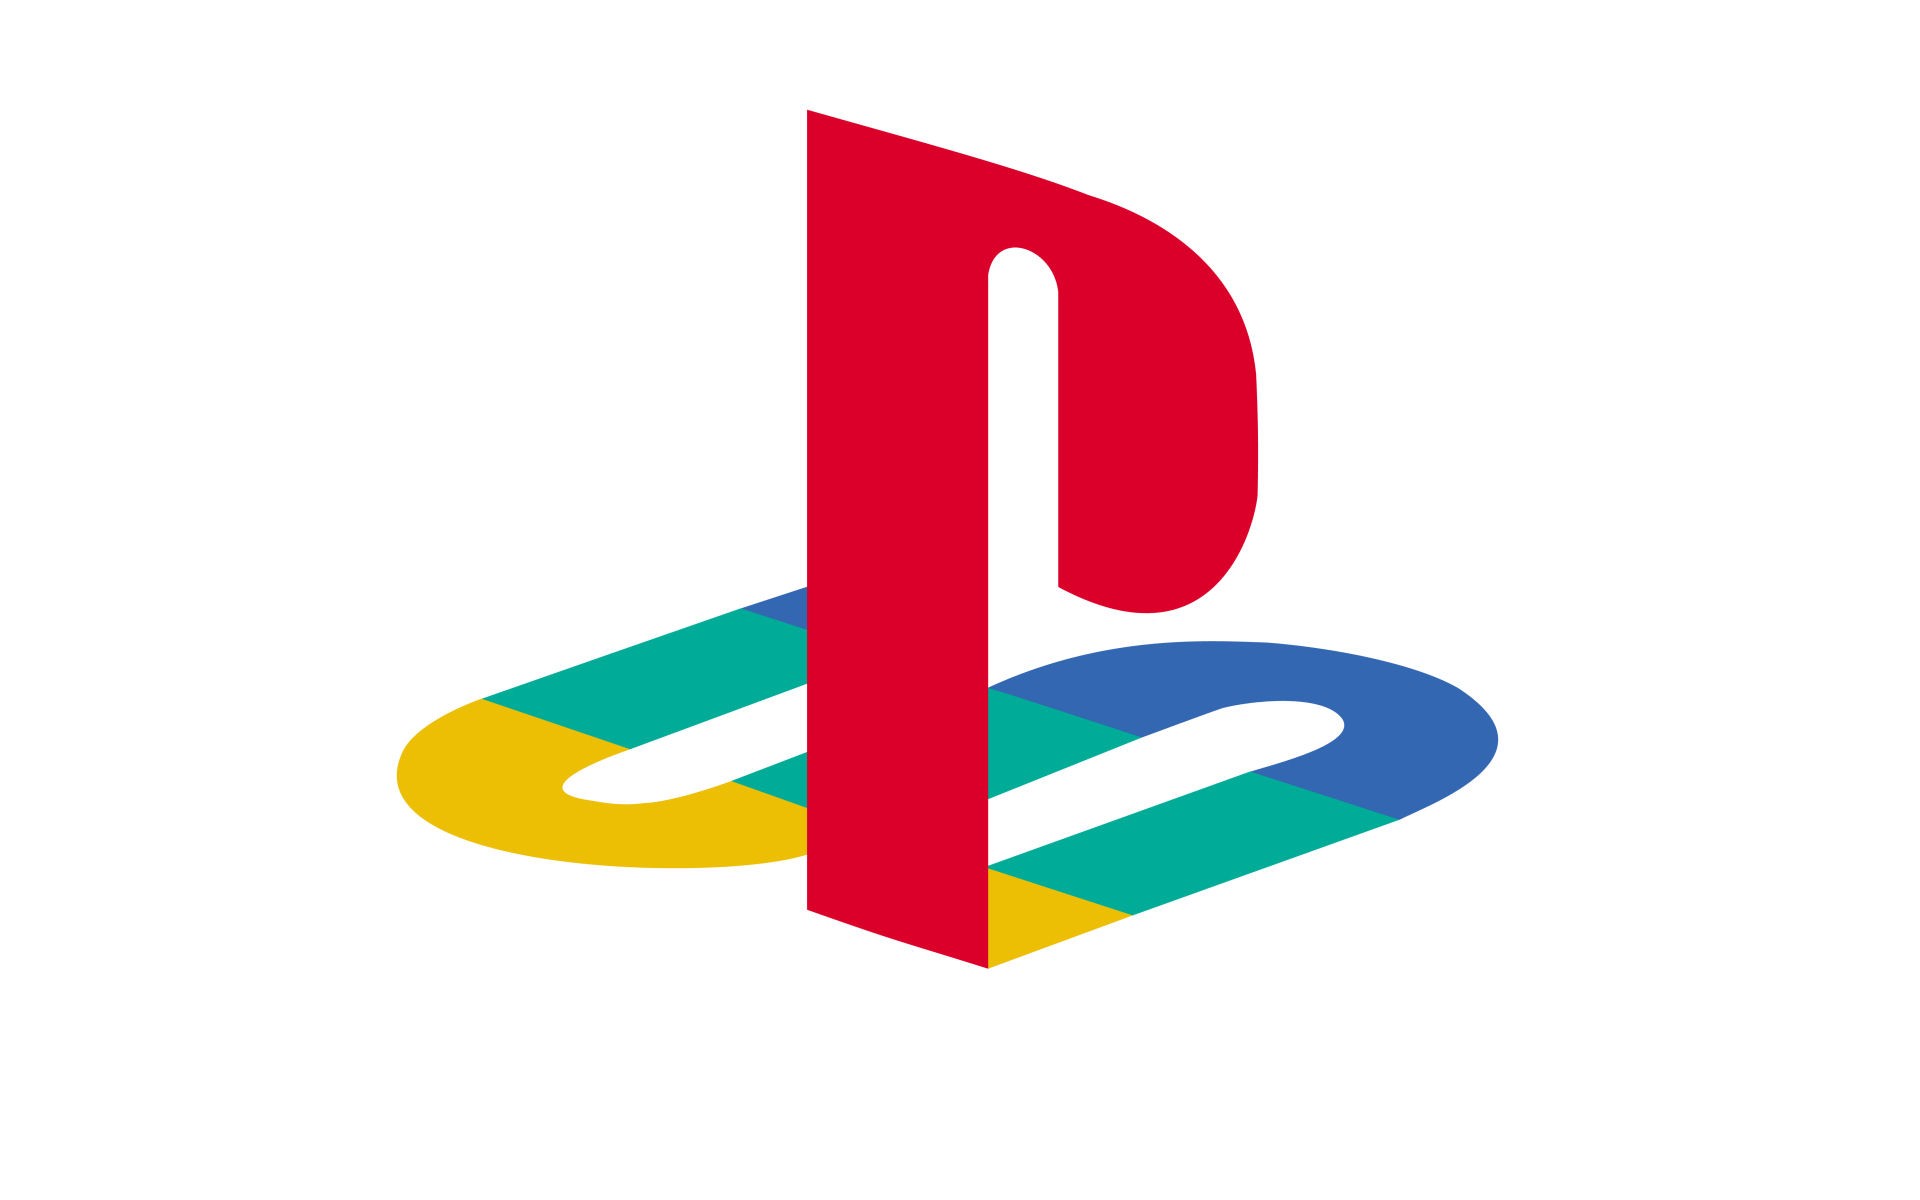 Video Game Playstation HD Wallpaper | Background Image